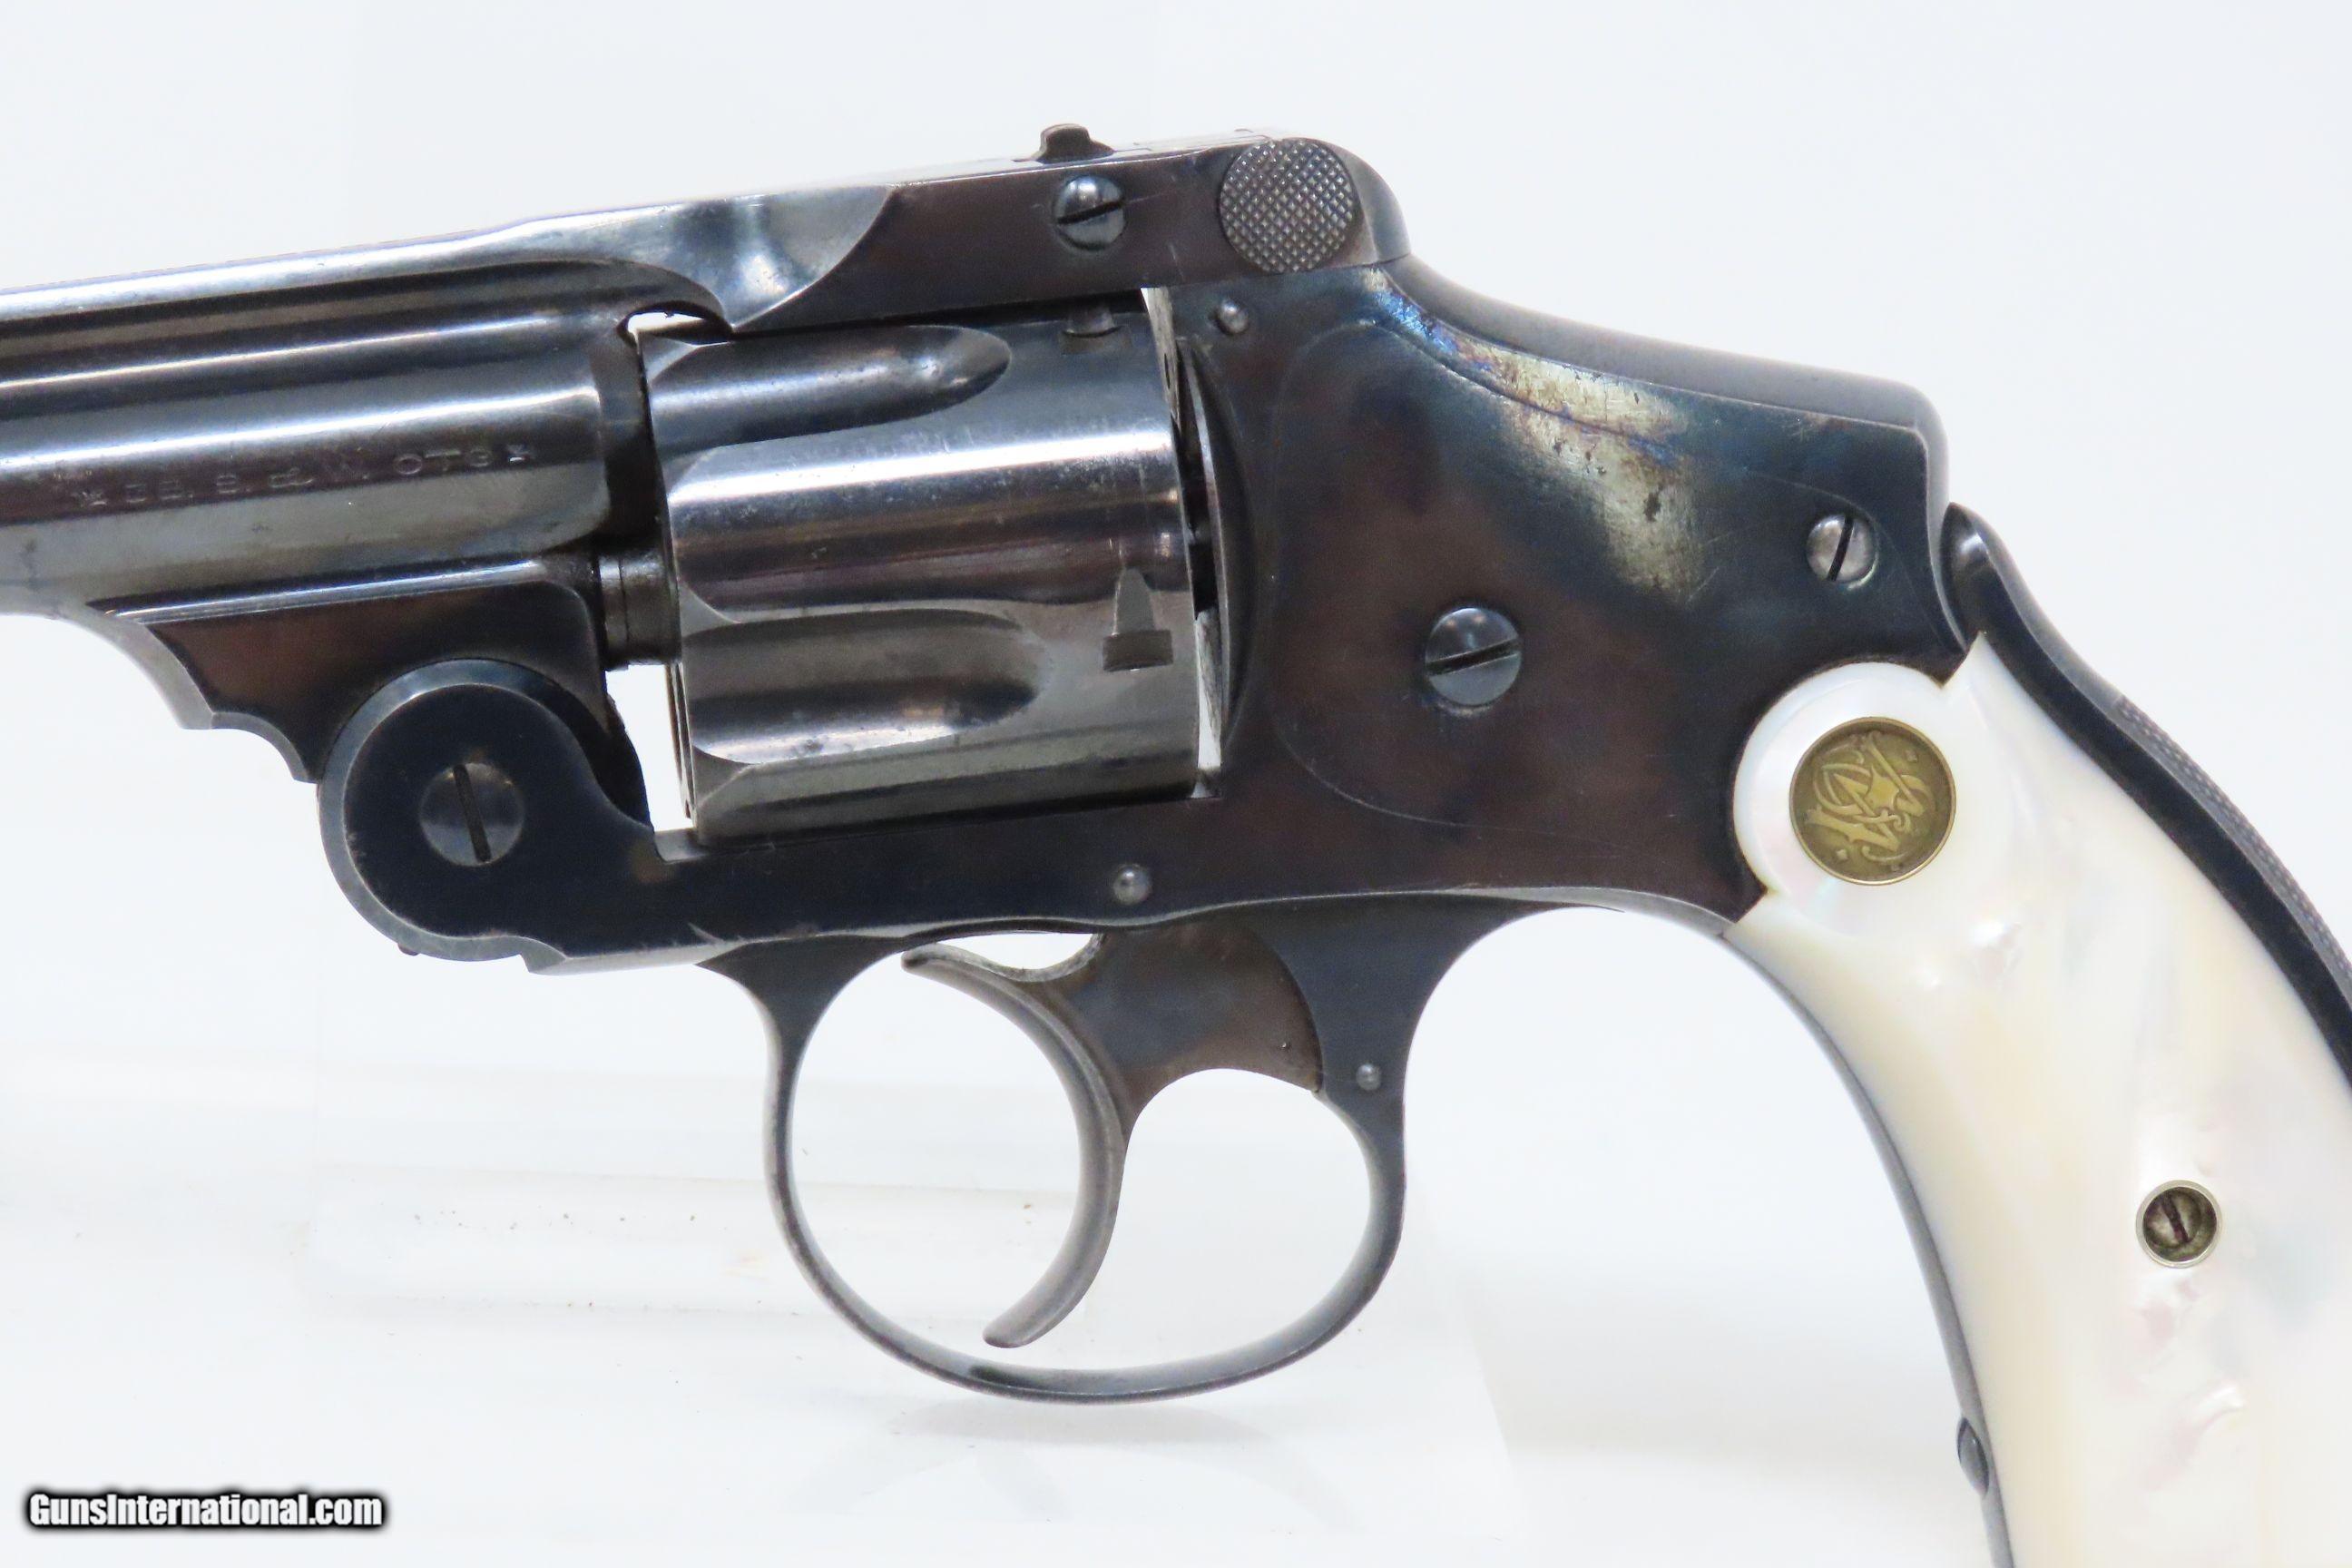 VERY NICE New Departure SMITH & WESSON .38 Safety Hammerless C&R 